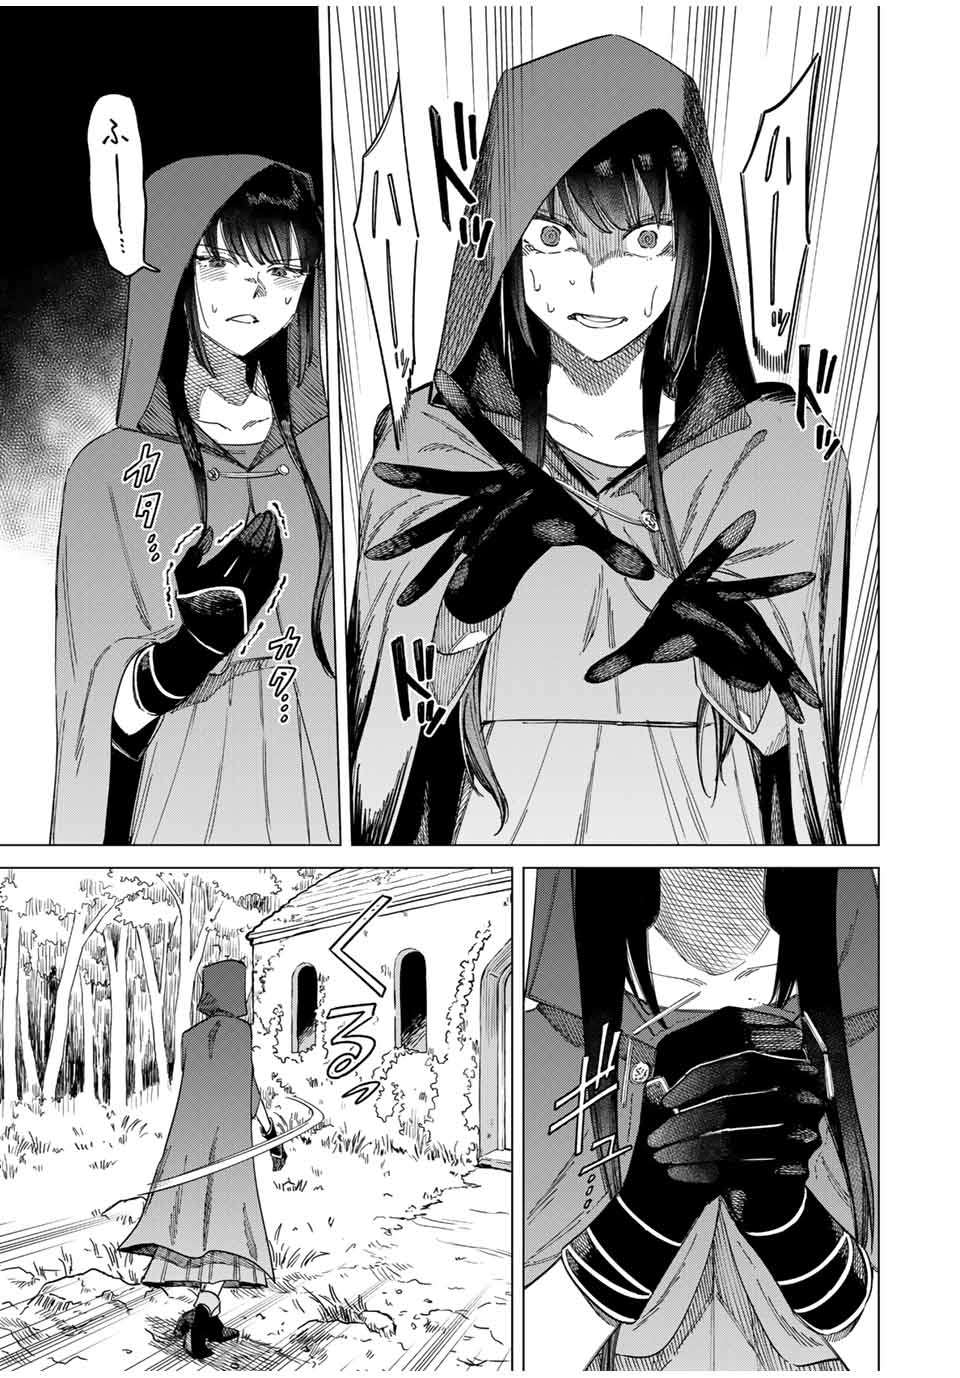 Witch and Mercenary 魔女と傭兵 第1.2話 - Page 13